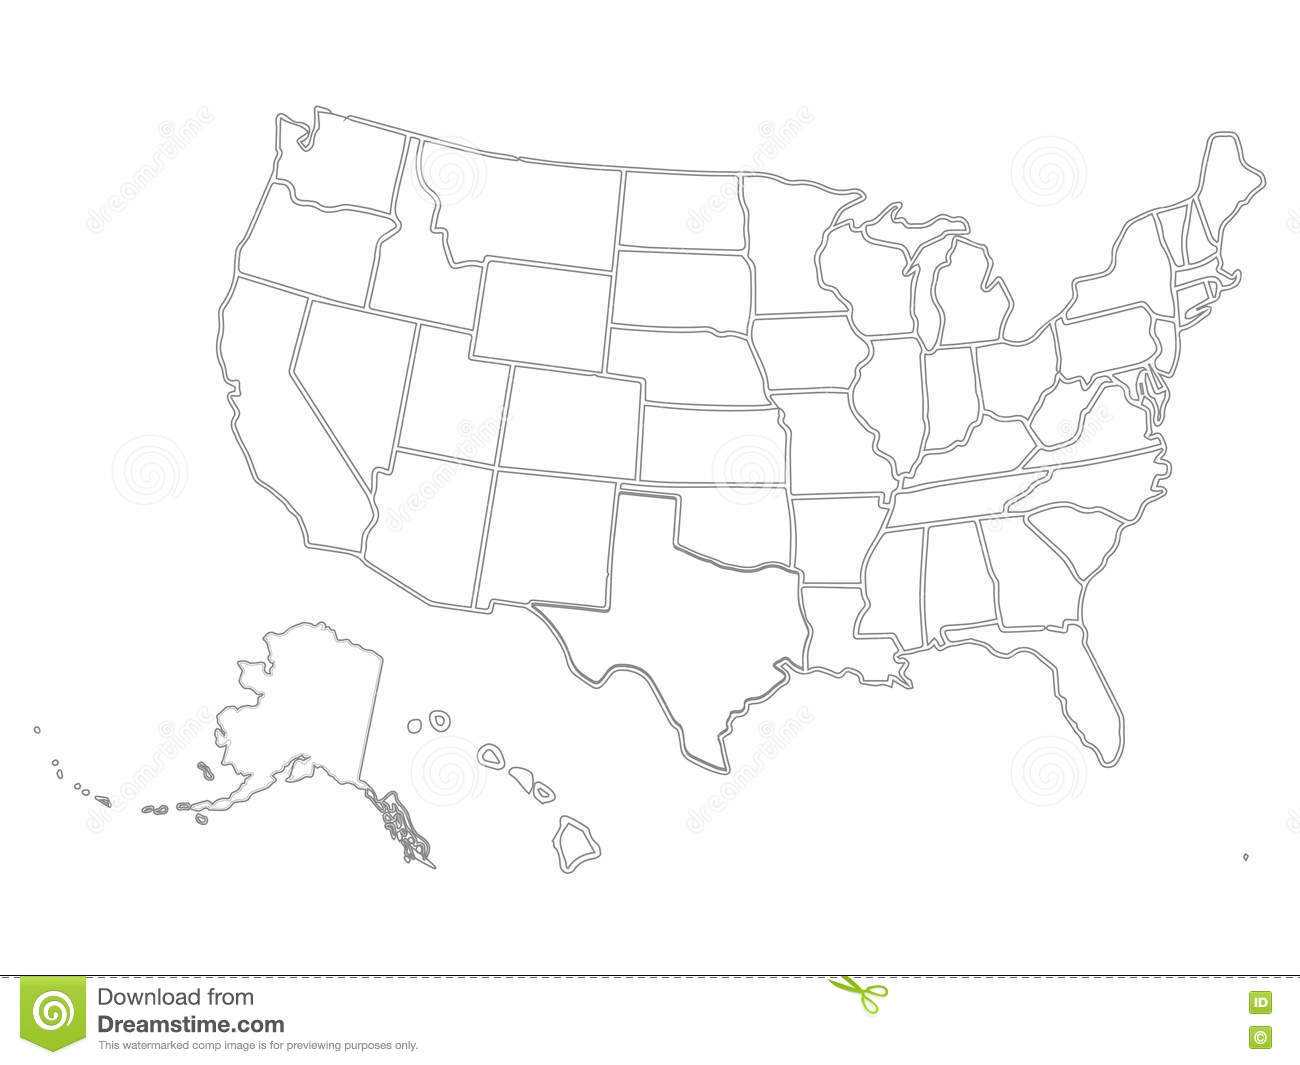 Blank Similar Usa Map On White Background. United States Of Intended For United States Map Template Blank